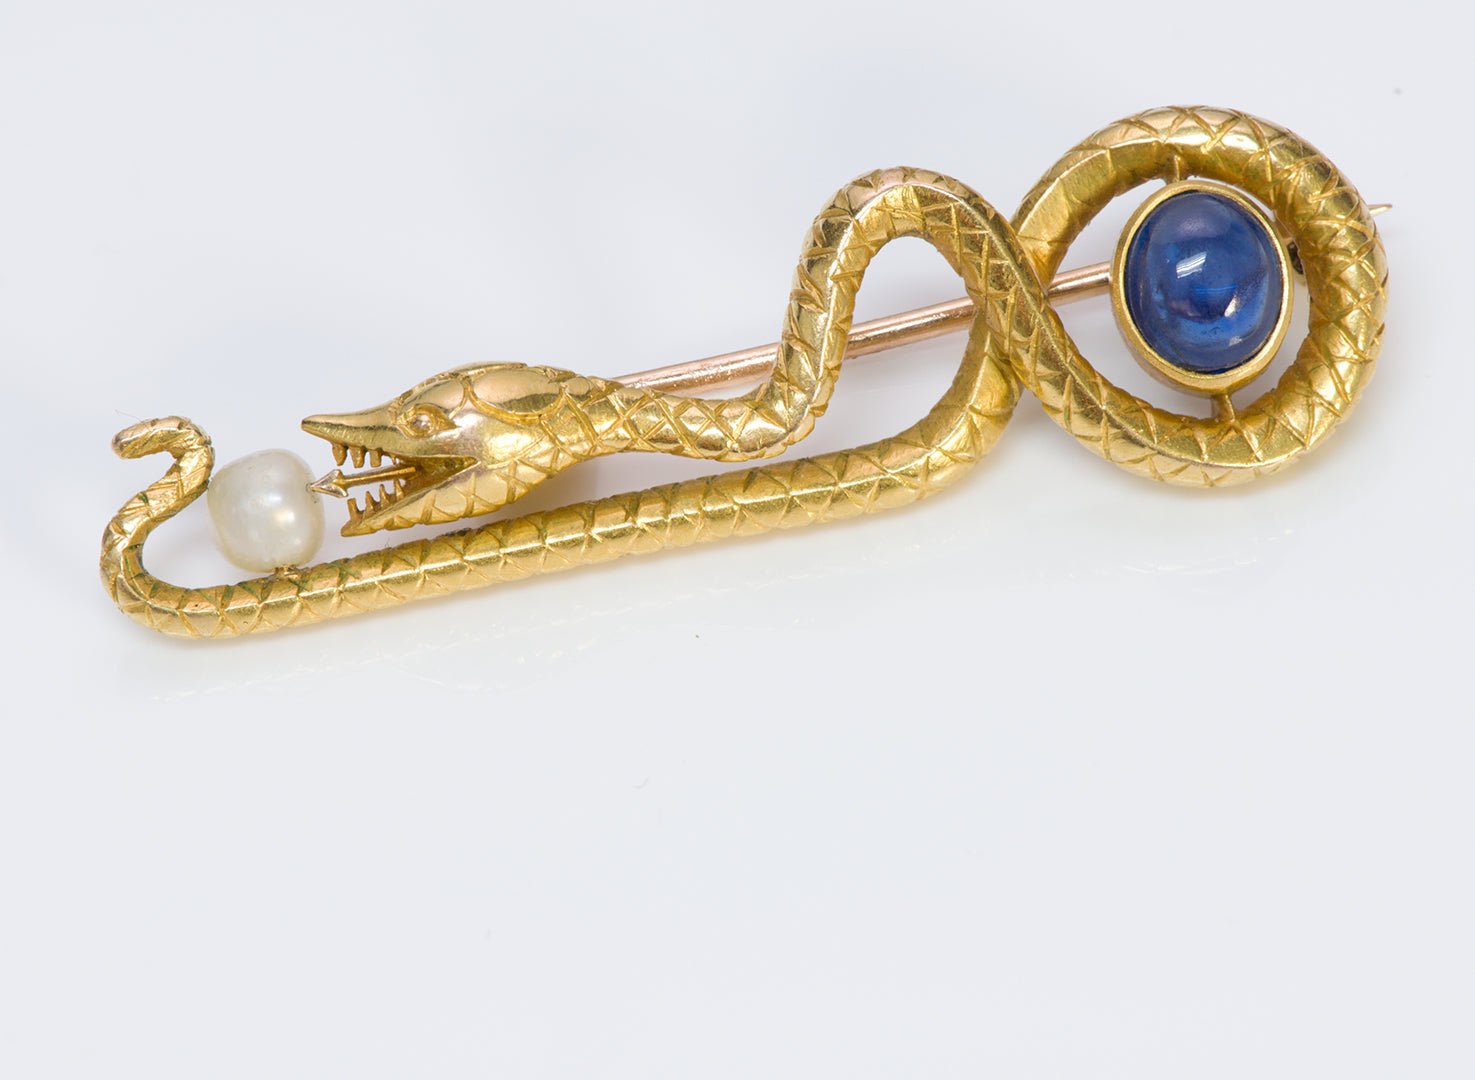 Giordano Antique Sapphire Natural Pearl Gold Snake Brooch